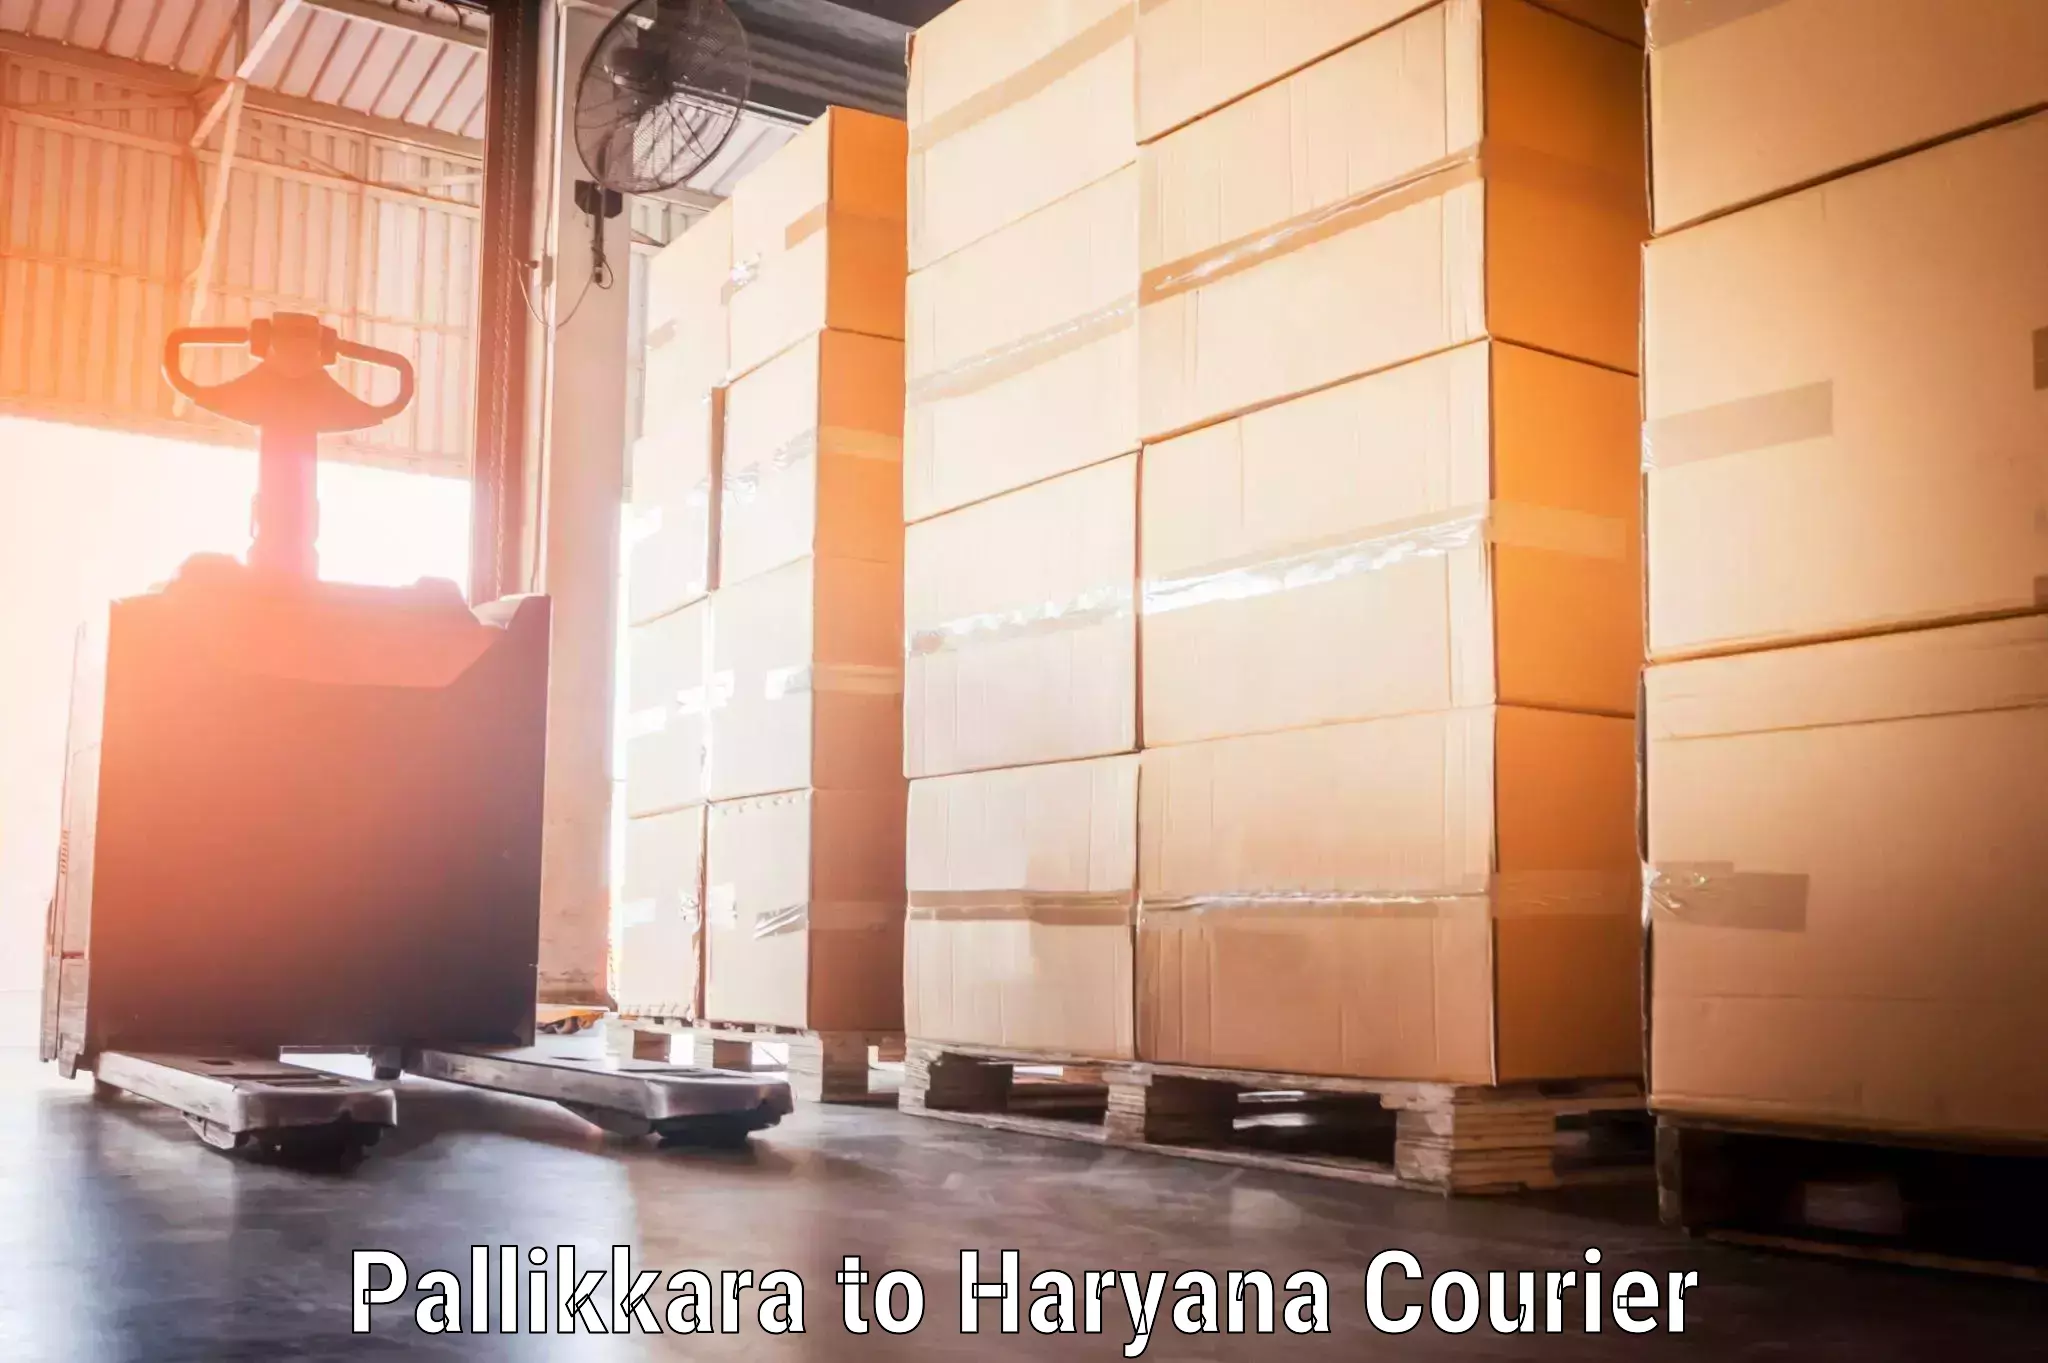 Personal luggage delivery in Pallikkara to Haryana